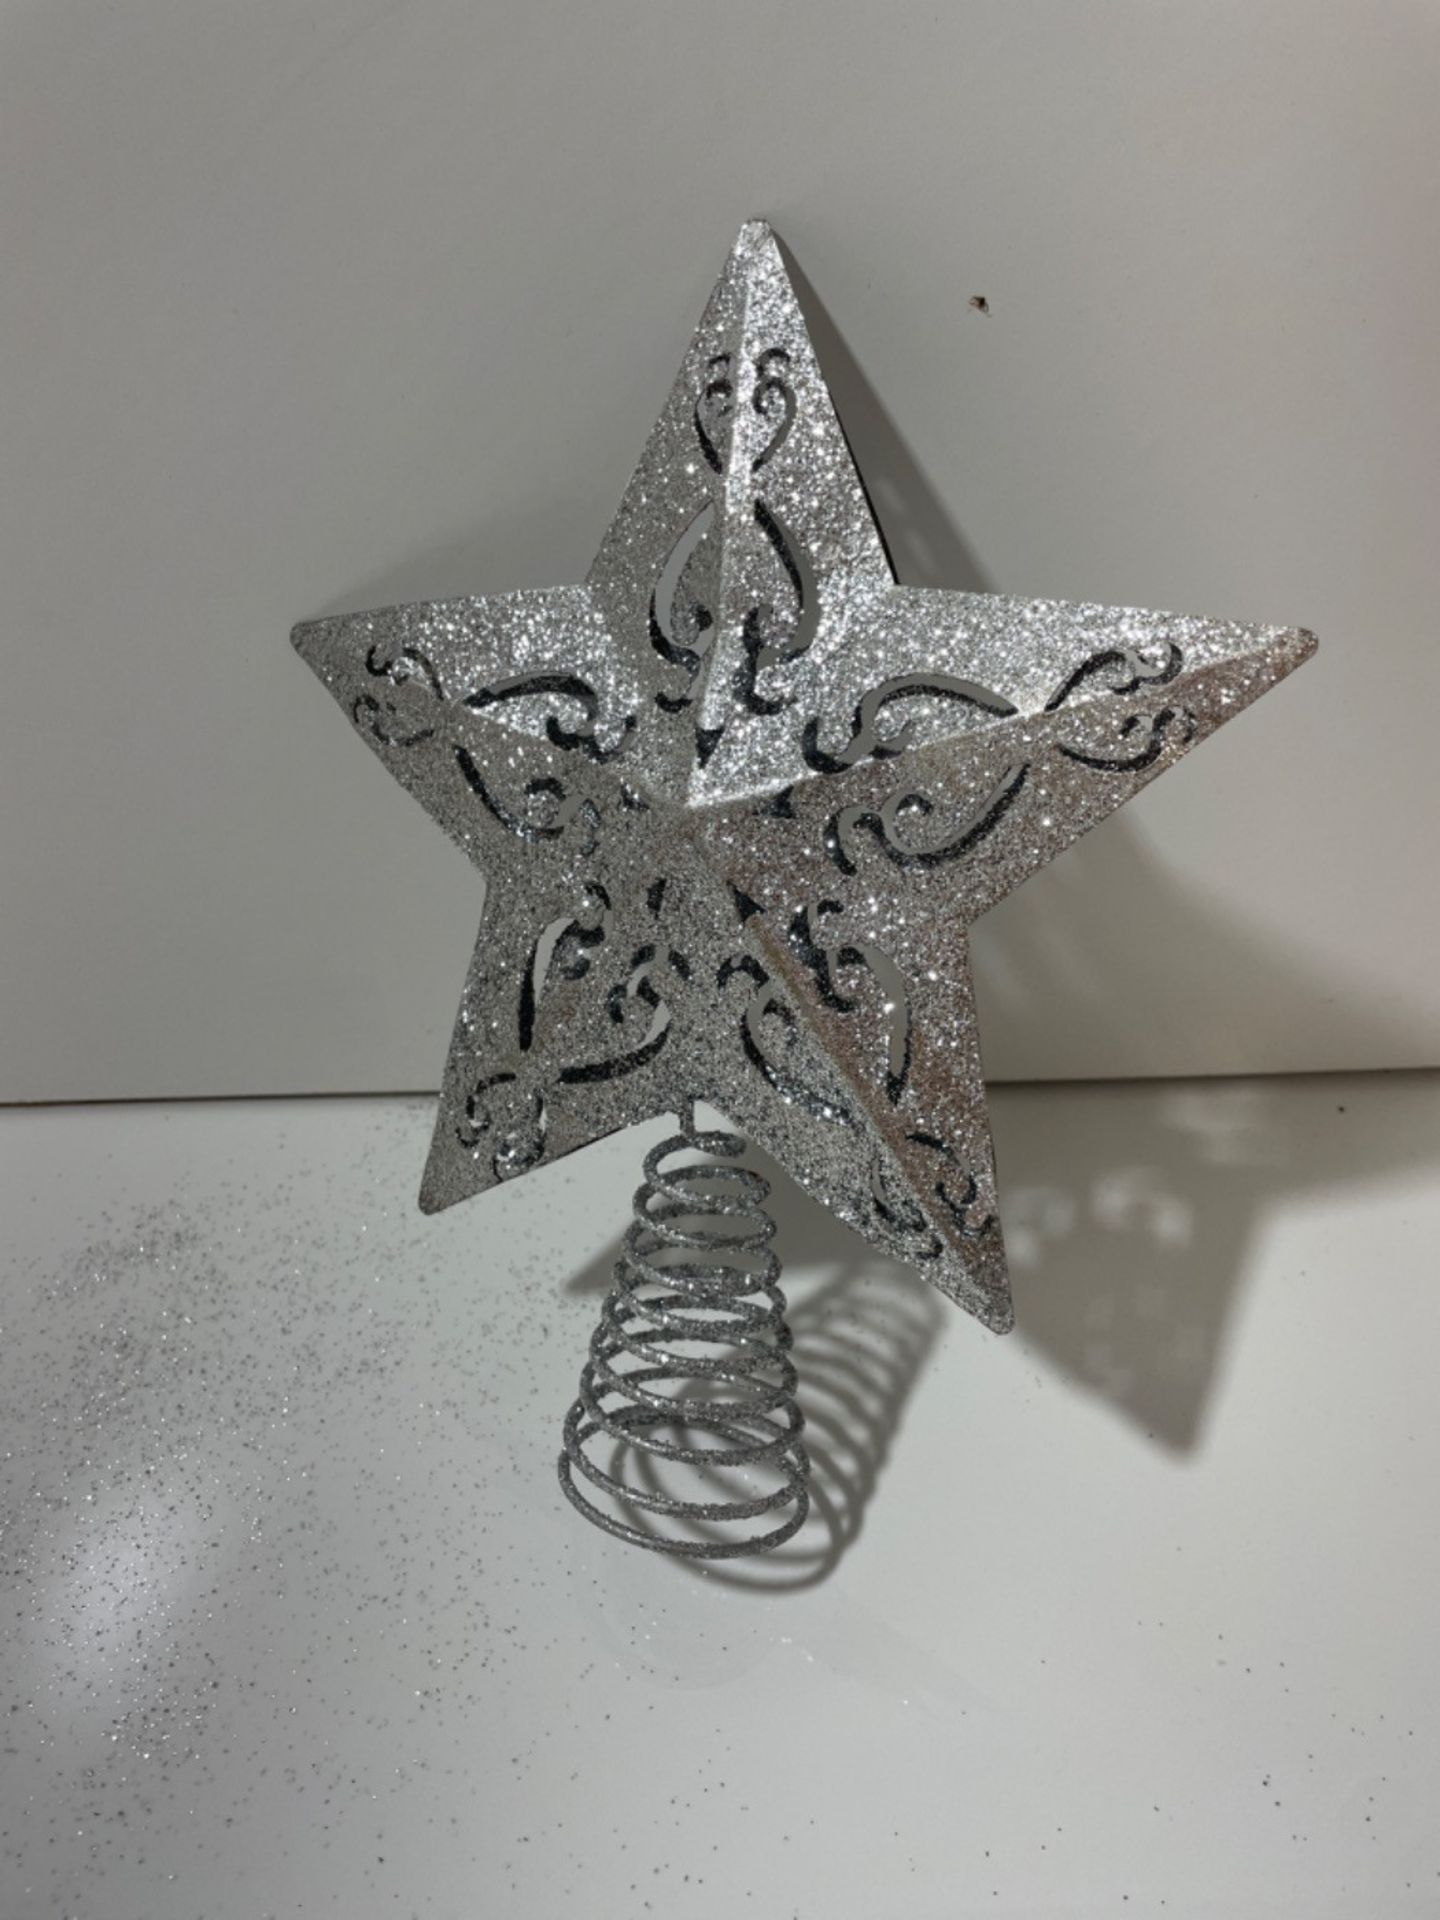 Aneco 8 Inches Glittered Christmas Tree Topper Metal 5 Point Star Treetop Xmas Tree Decoration Wire - Image 2 of 3